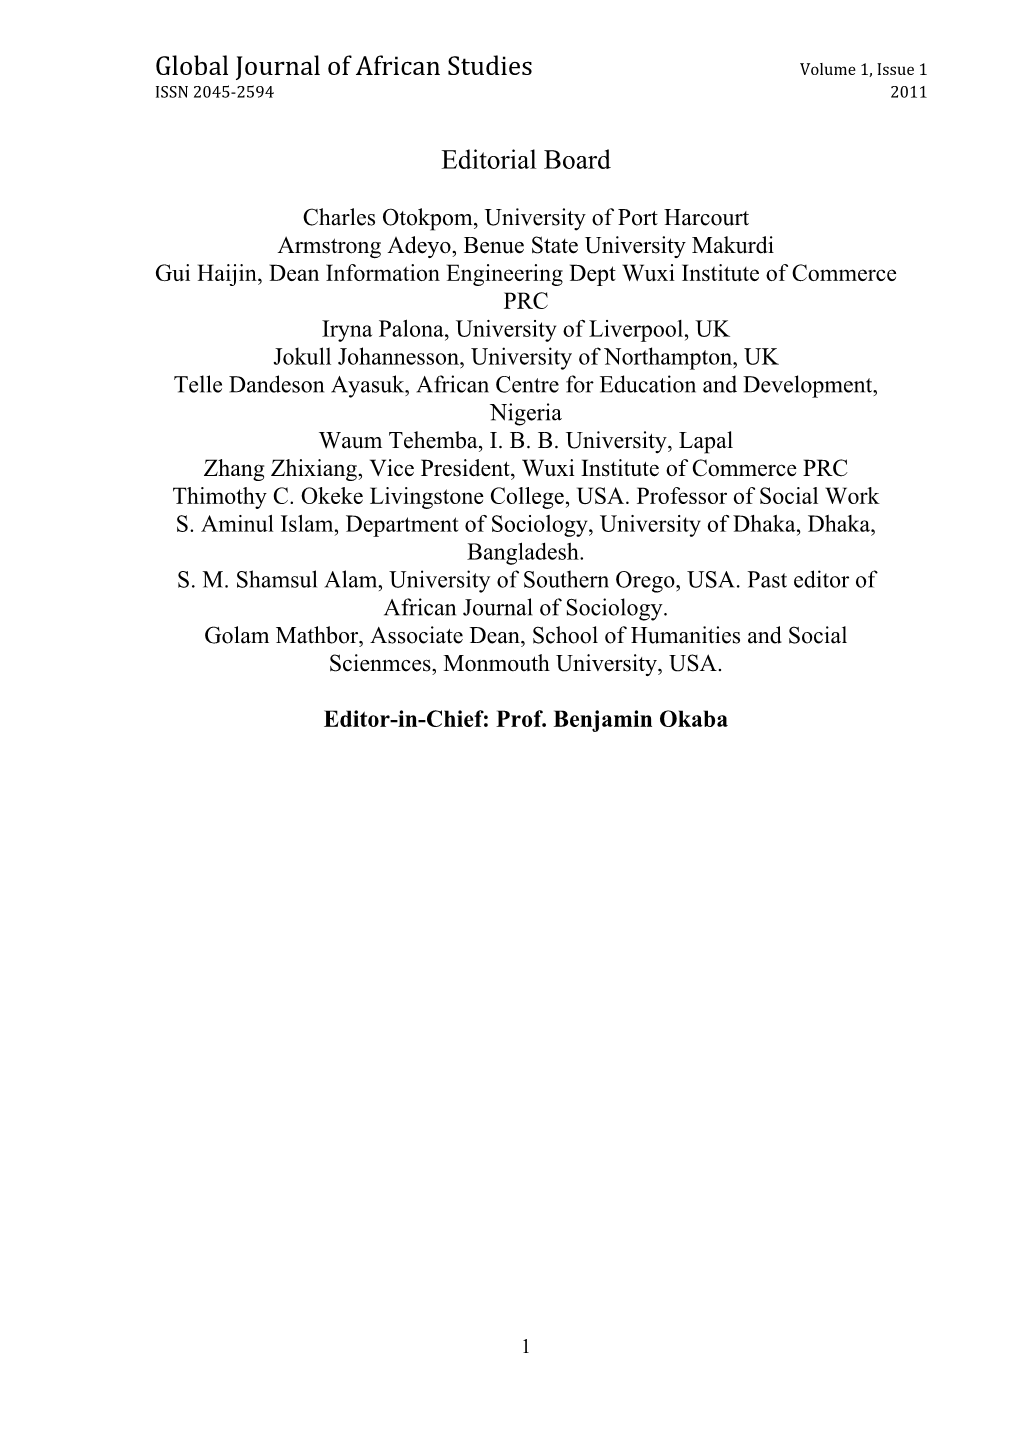 Global Journal of African Studies Volume 1, Issue 1 ISSN 2045-2594 2011